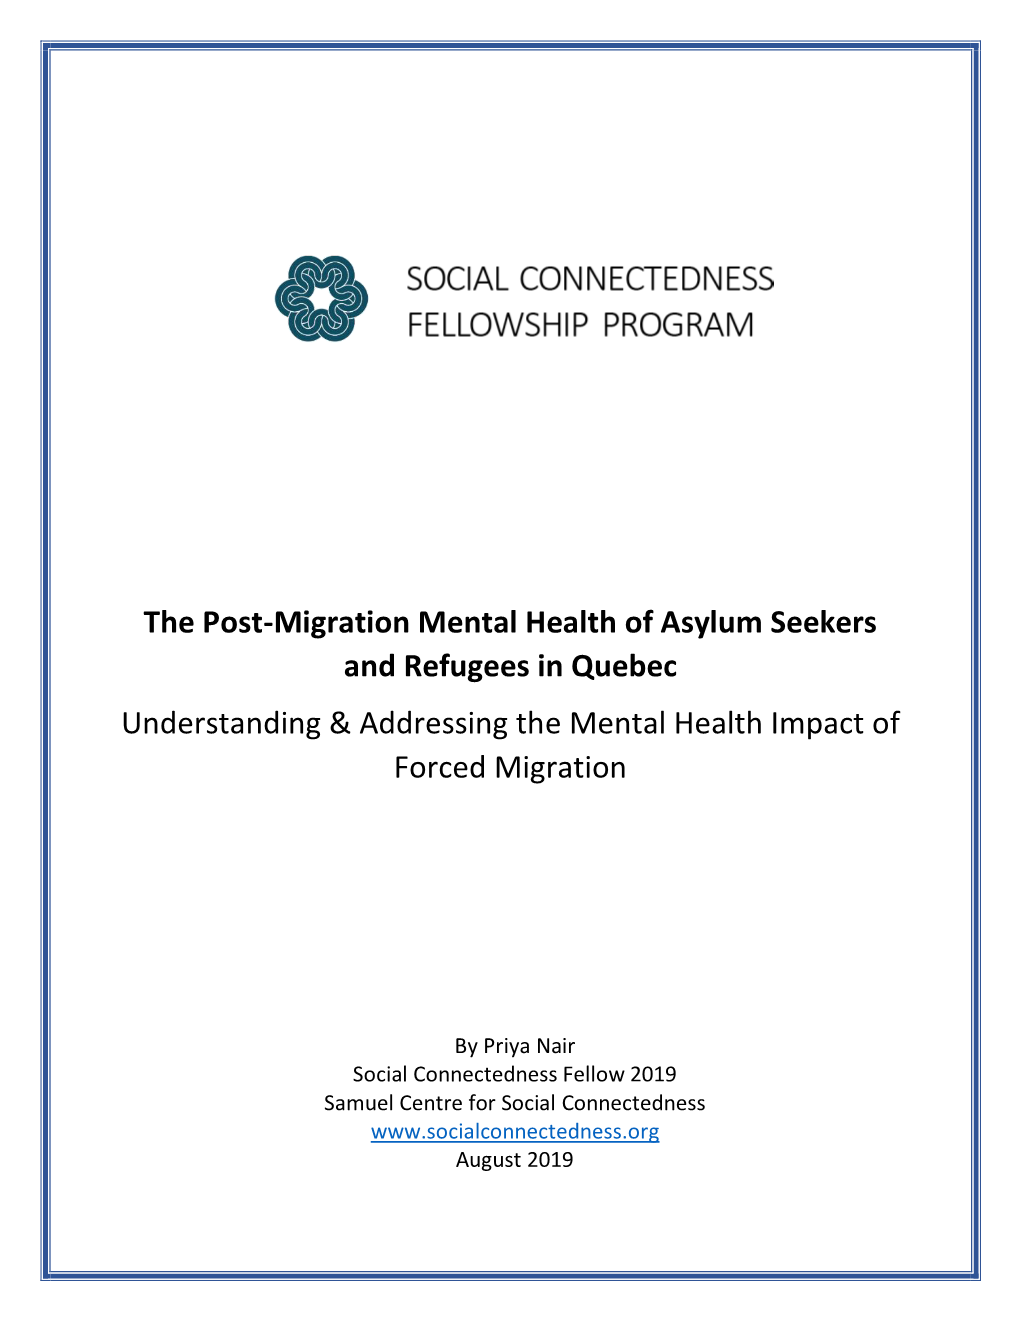 The Post-Migration Mental Health of Asylum Seekers and Refugees in Quebec Understanding & Addressing the Mental Health Impact of Forced Migration